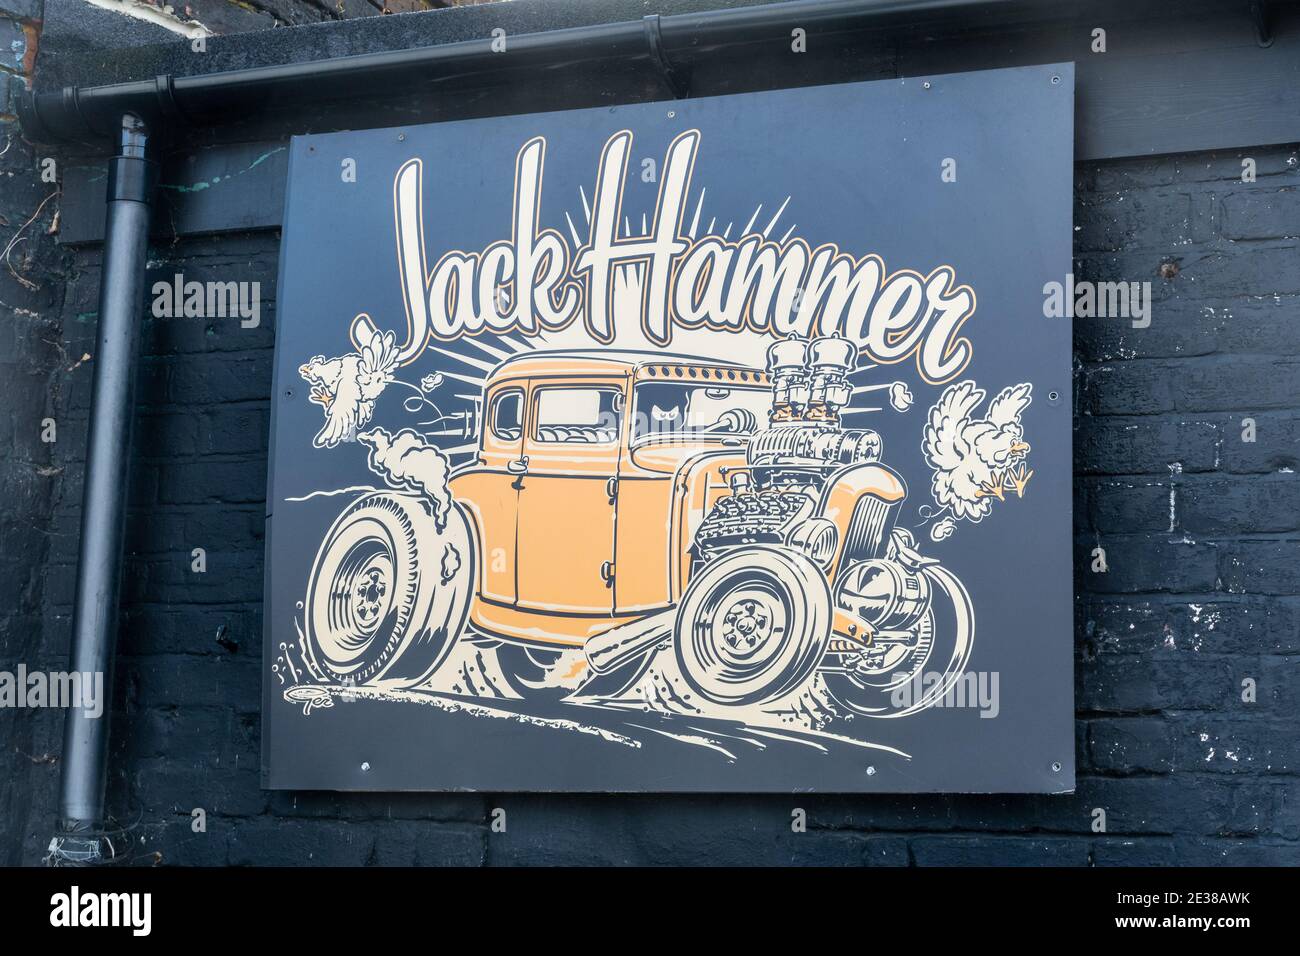 Jack Hammer sign on a hot rod car parts shop or store, UK Stock Photo